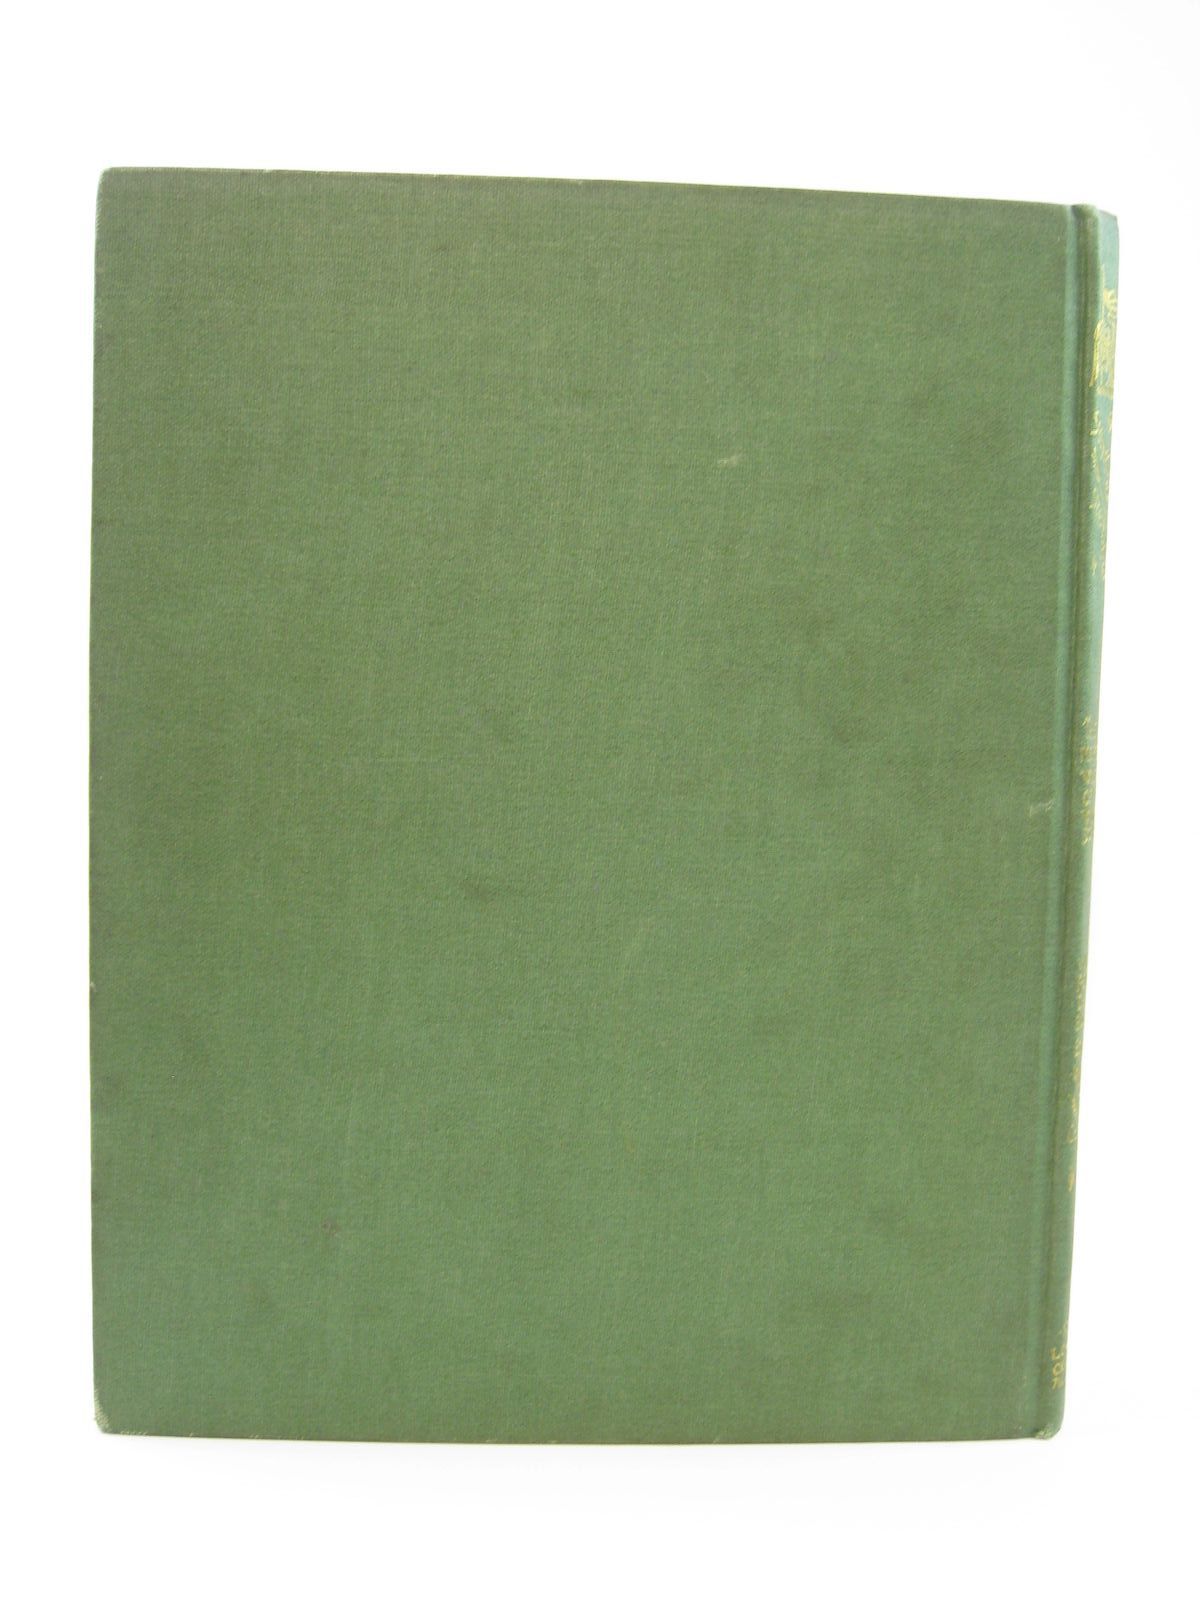 Photo of SHAKESPEARE'S COMEDY OF THE MERRY WIVES OF WINDSOR written by Shakespeare, William illustrated by Crane, Walter published by George Allen (STOCK CODE: 1507573)  for sale by Stella & Rose's Books